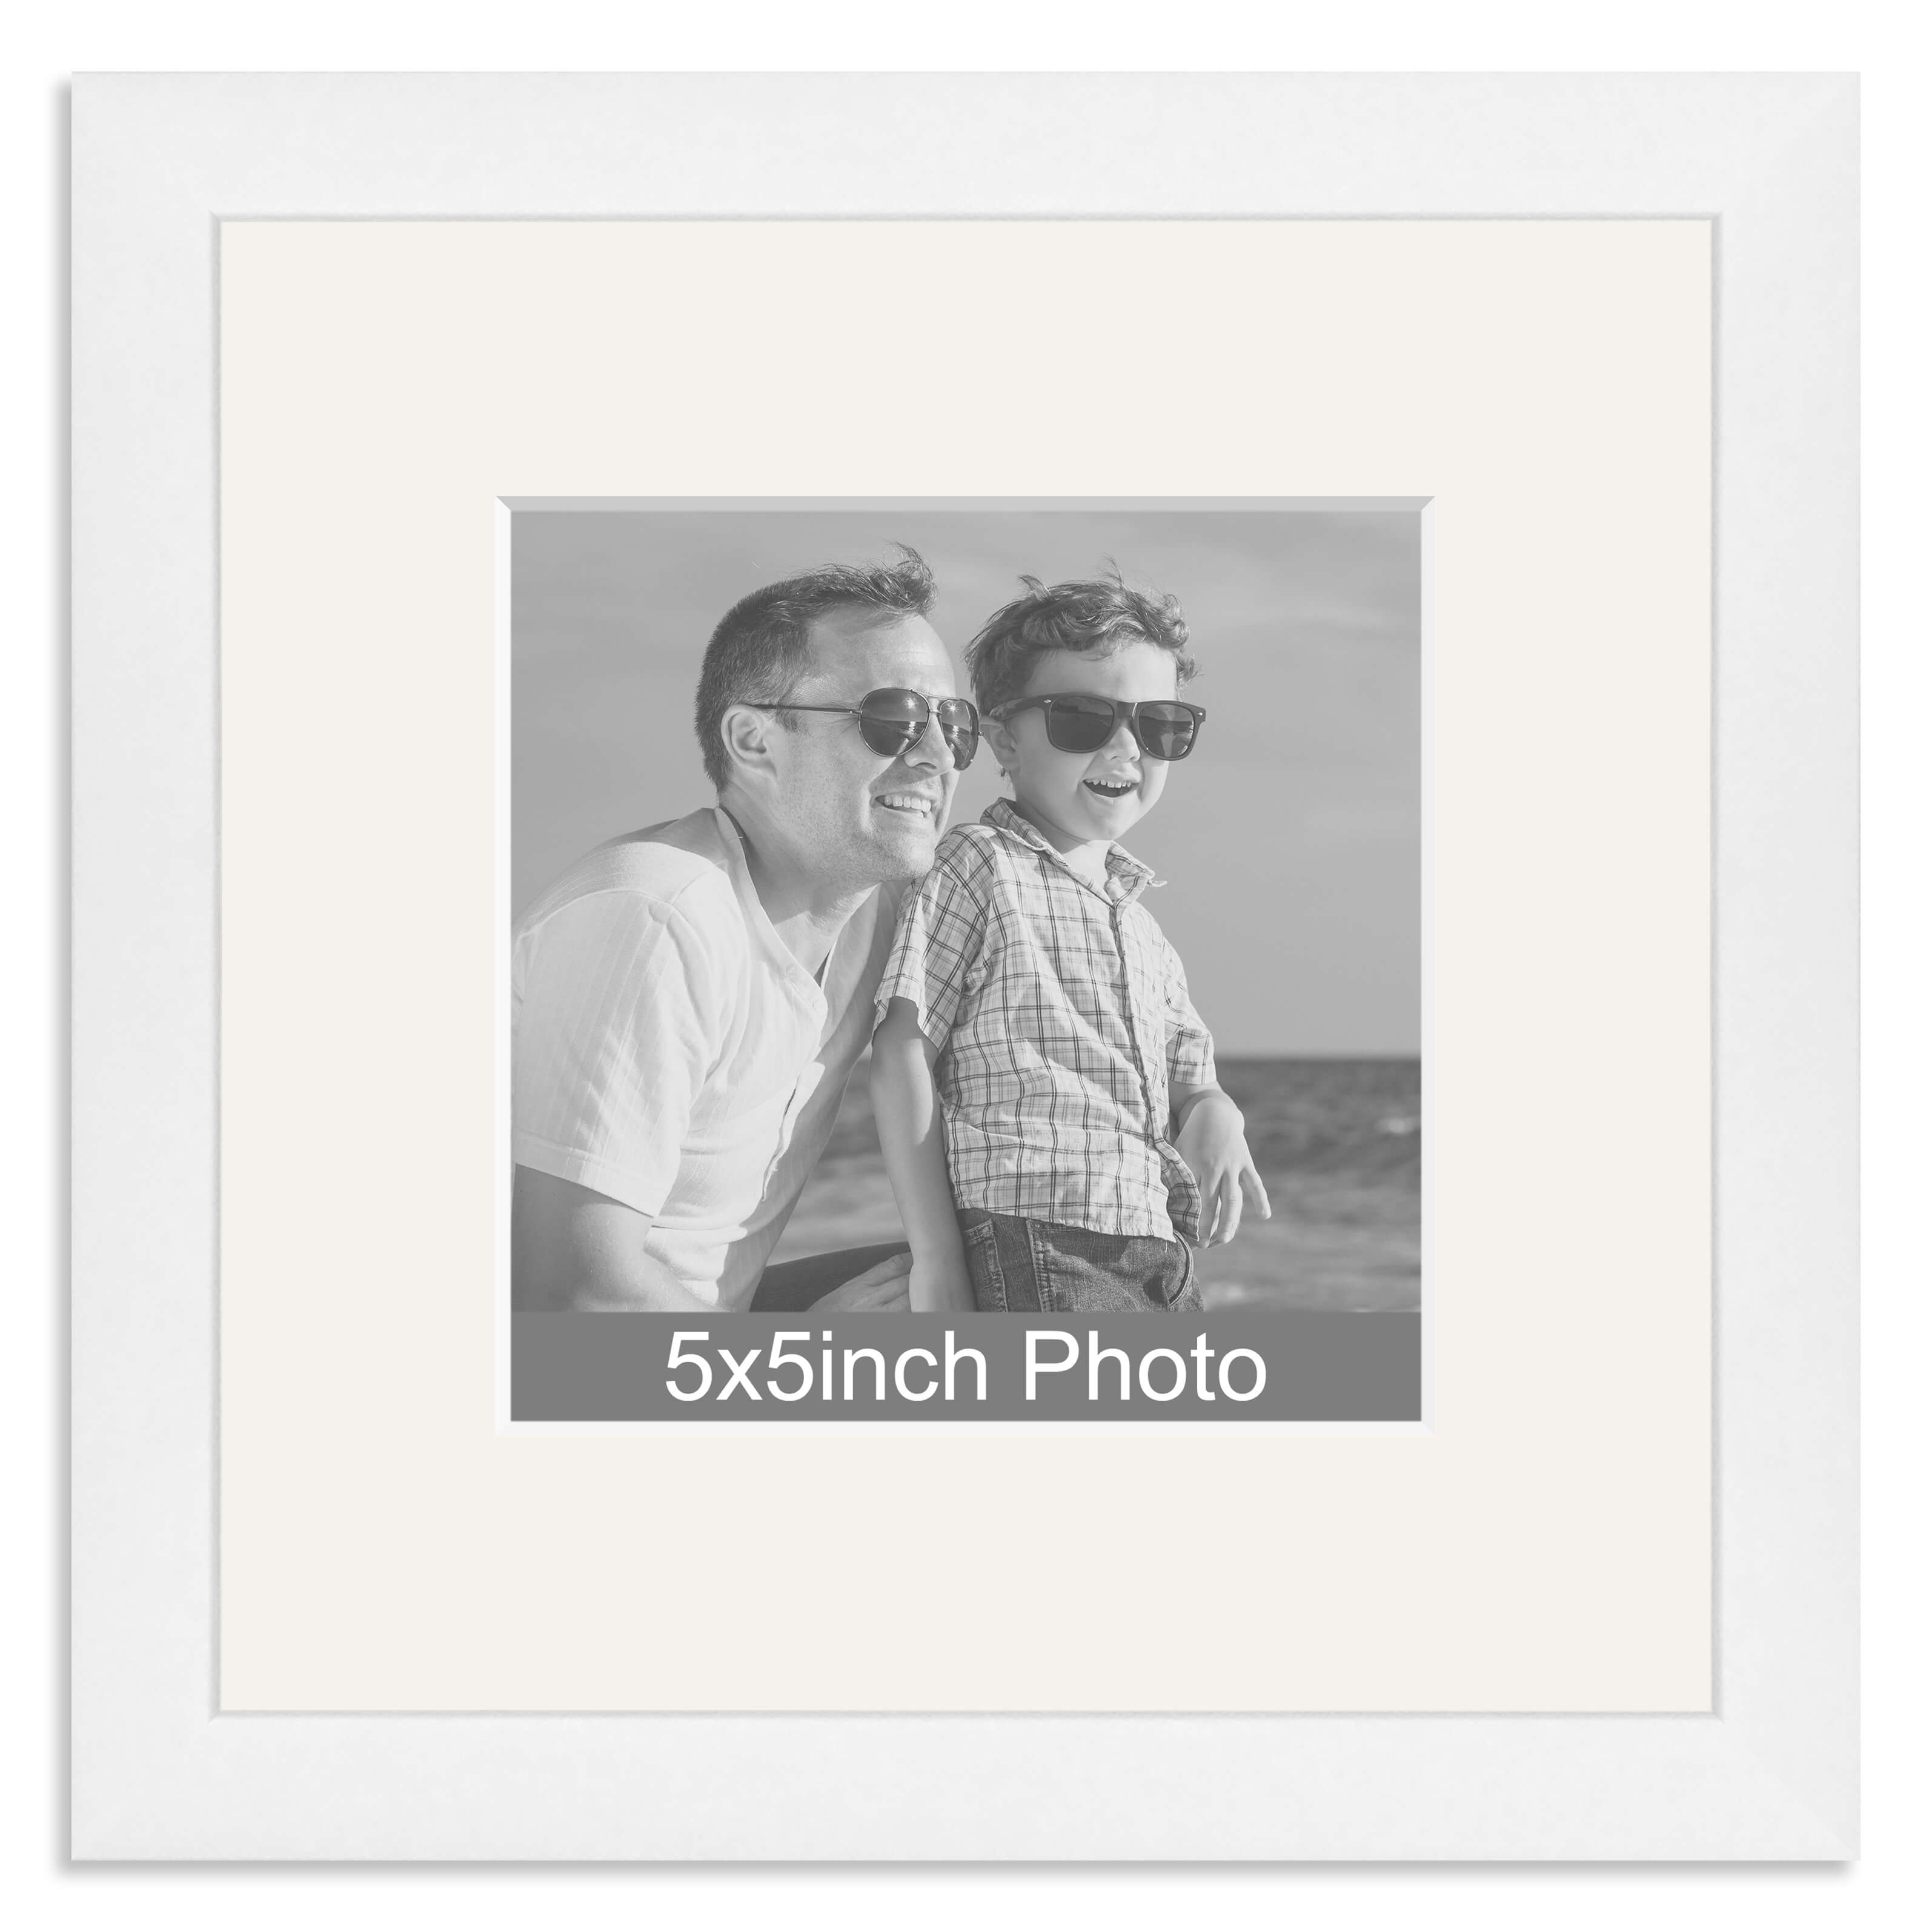 White Wooden Photo Frame with mount for a 5x5in Photo – No Photo required